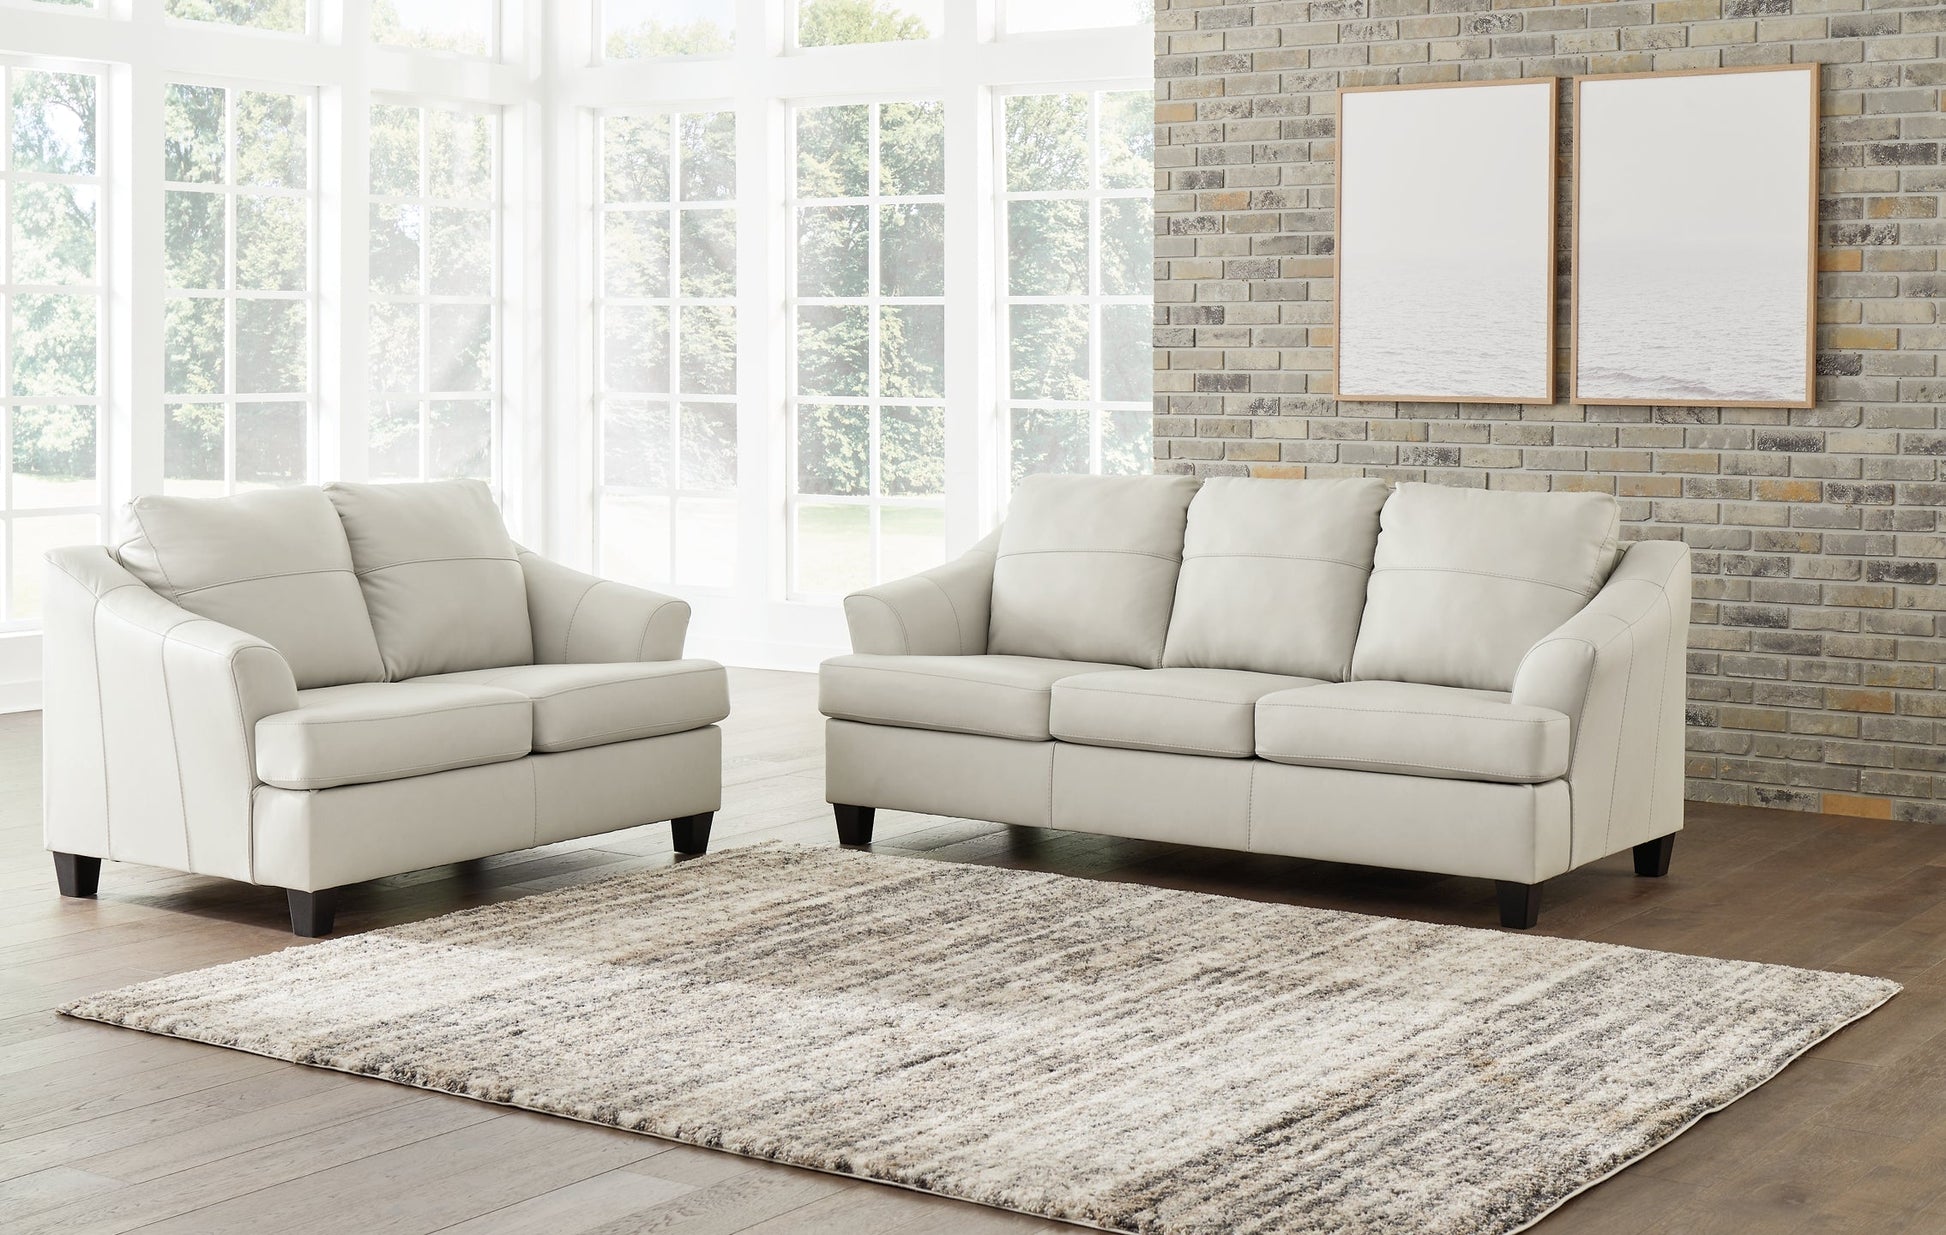 Genoa Sofa and Loveseat at Walker Mattress and Furniture Locations in Cedar Park and Belton TX.